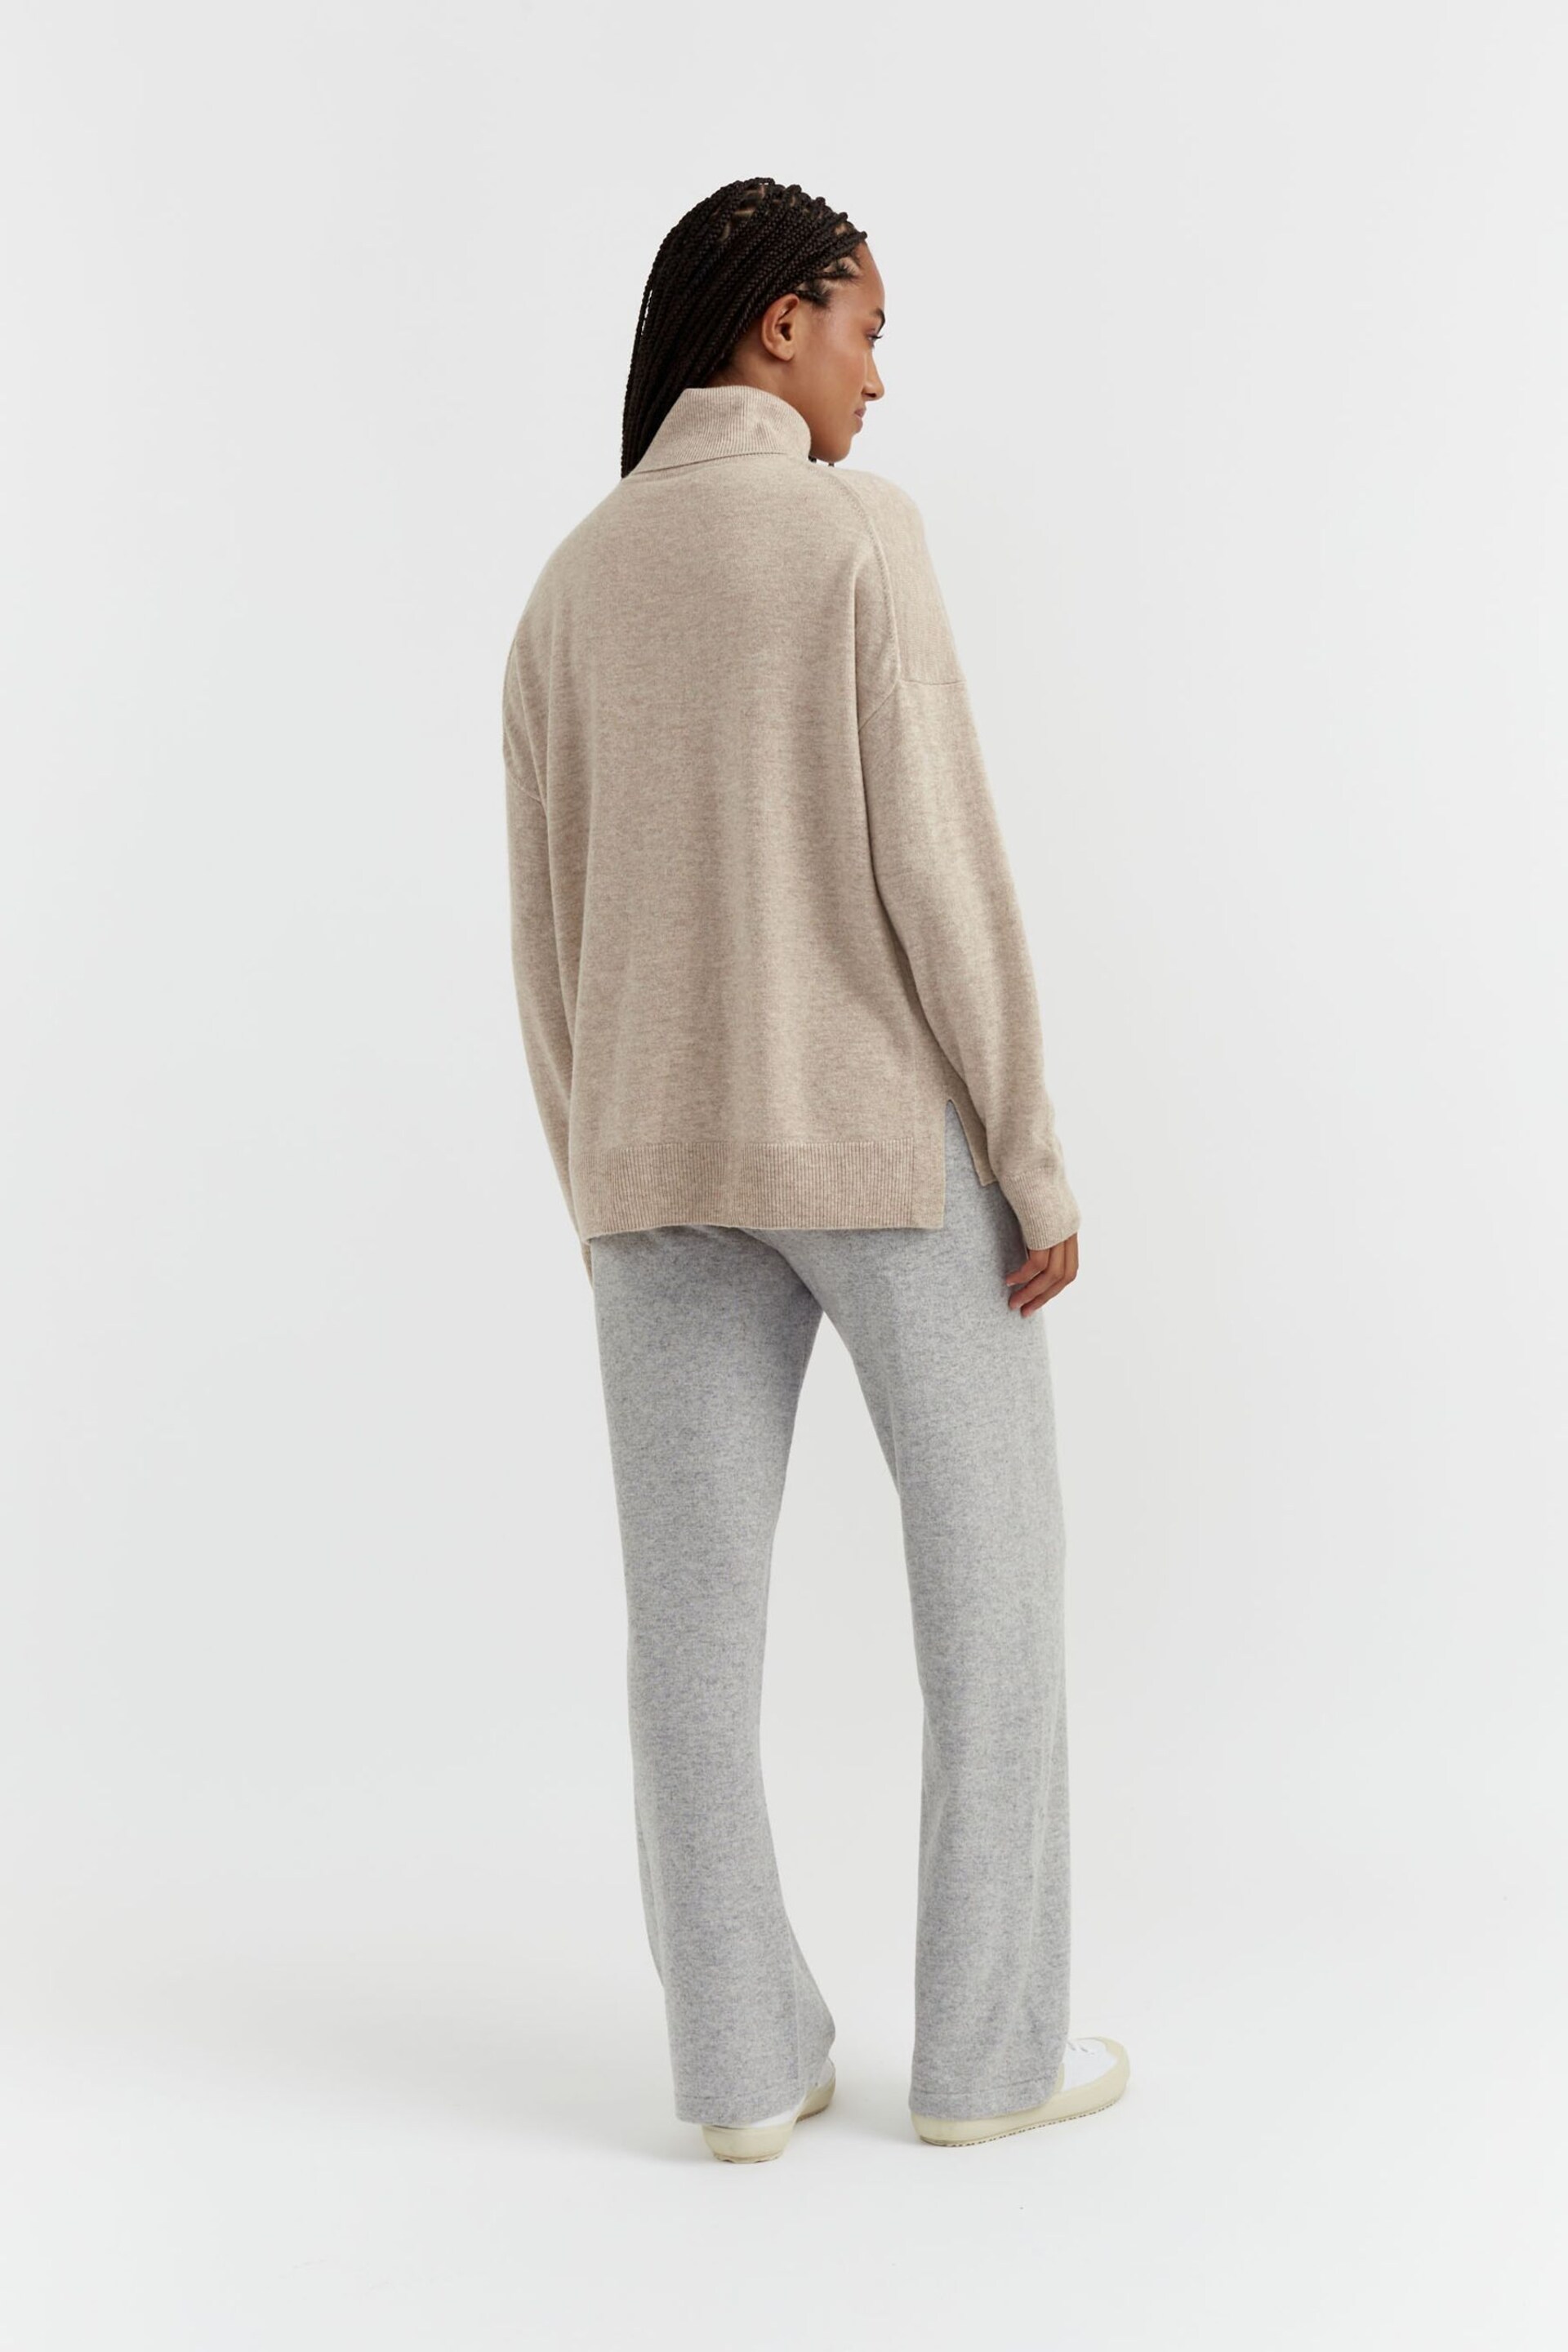 Chinti & Parker Wool/Cashmere Relaxed Roll Neck Jumper - Image 4 of 5